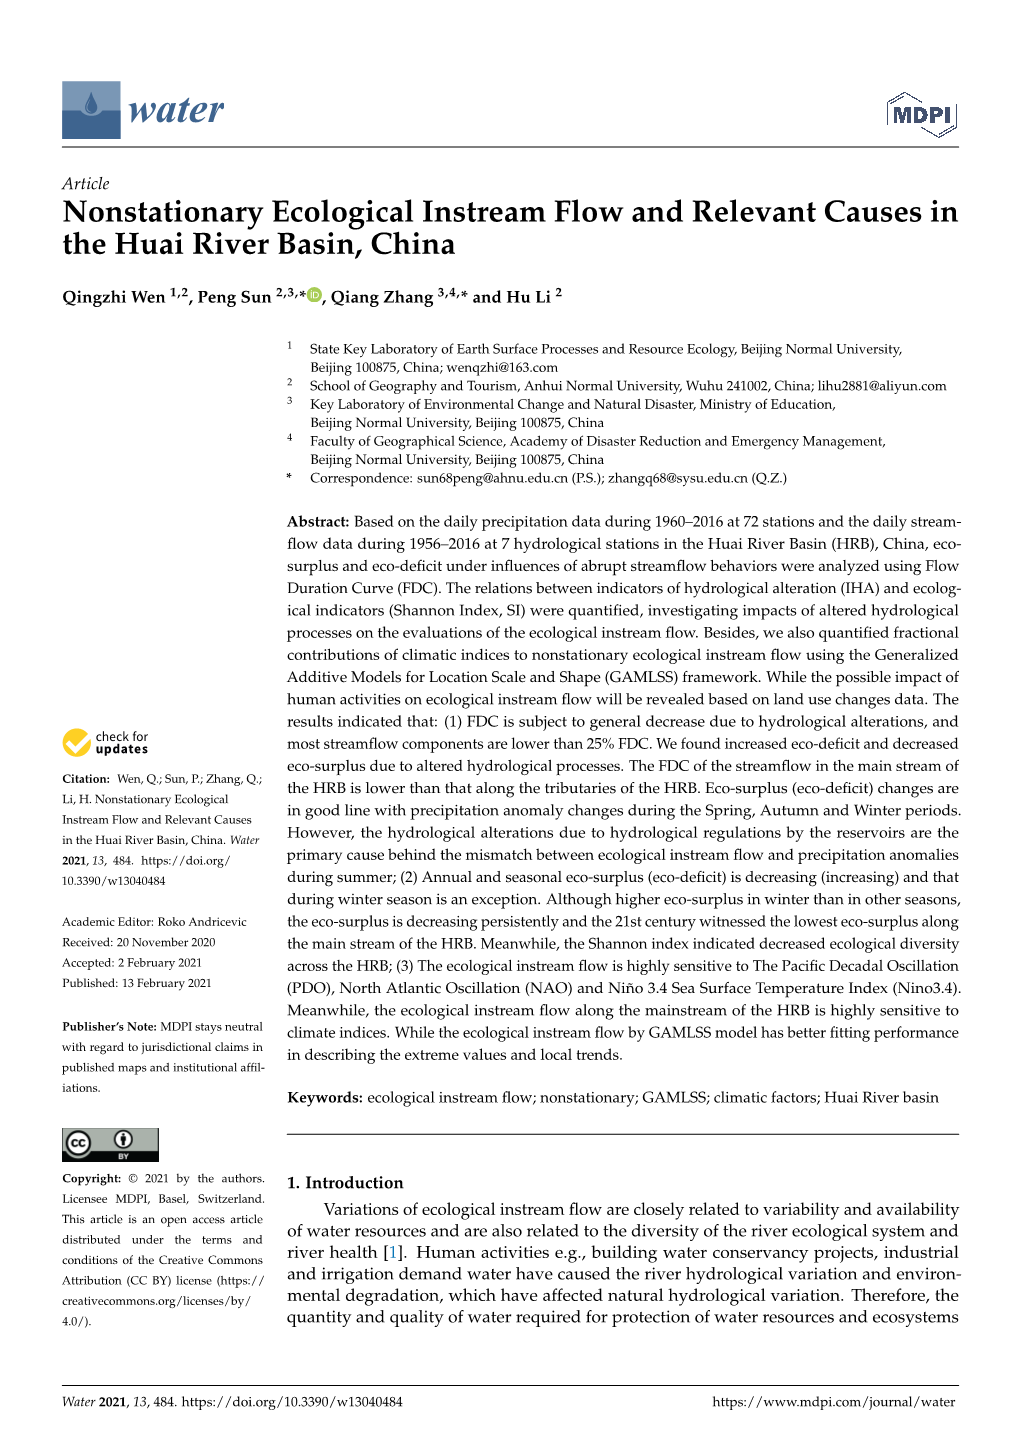 Nonstationary Ecological Instream Flow and Relevant Causes in the Huai River Basin, China